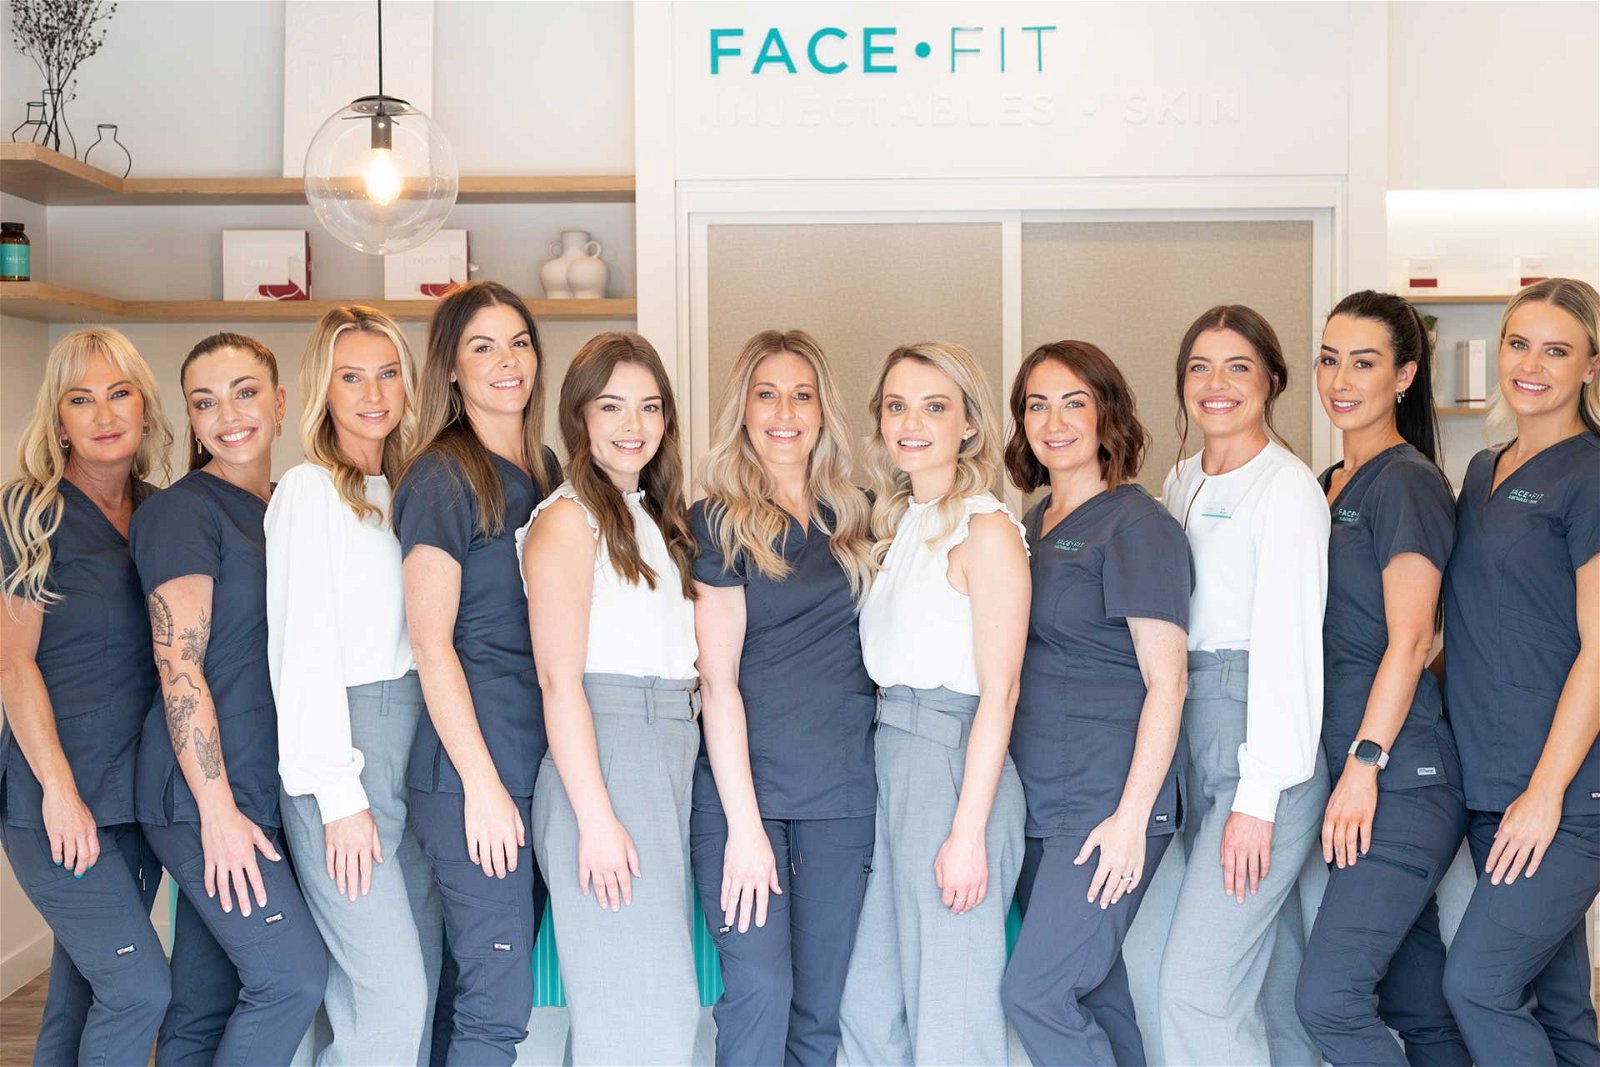 Group photo of the Face Fit team in the clinic